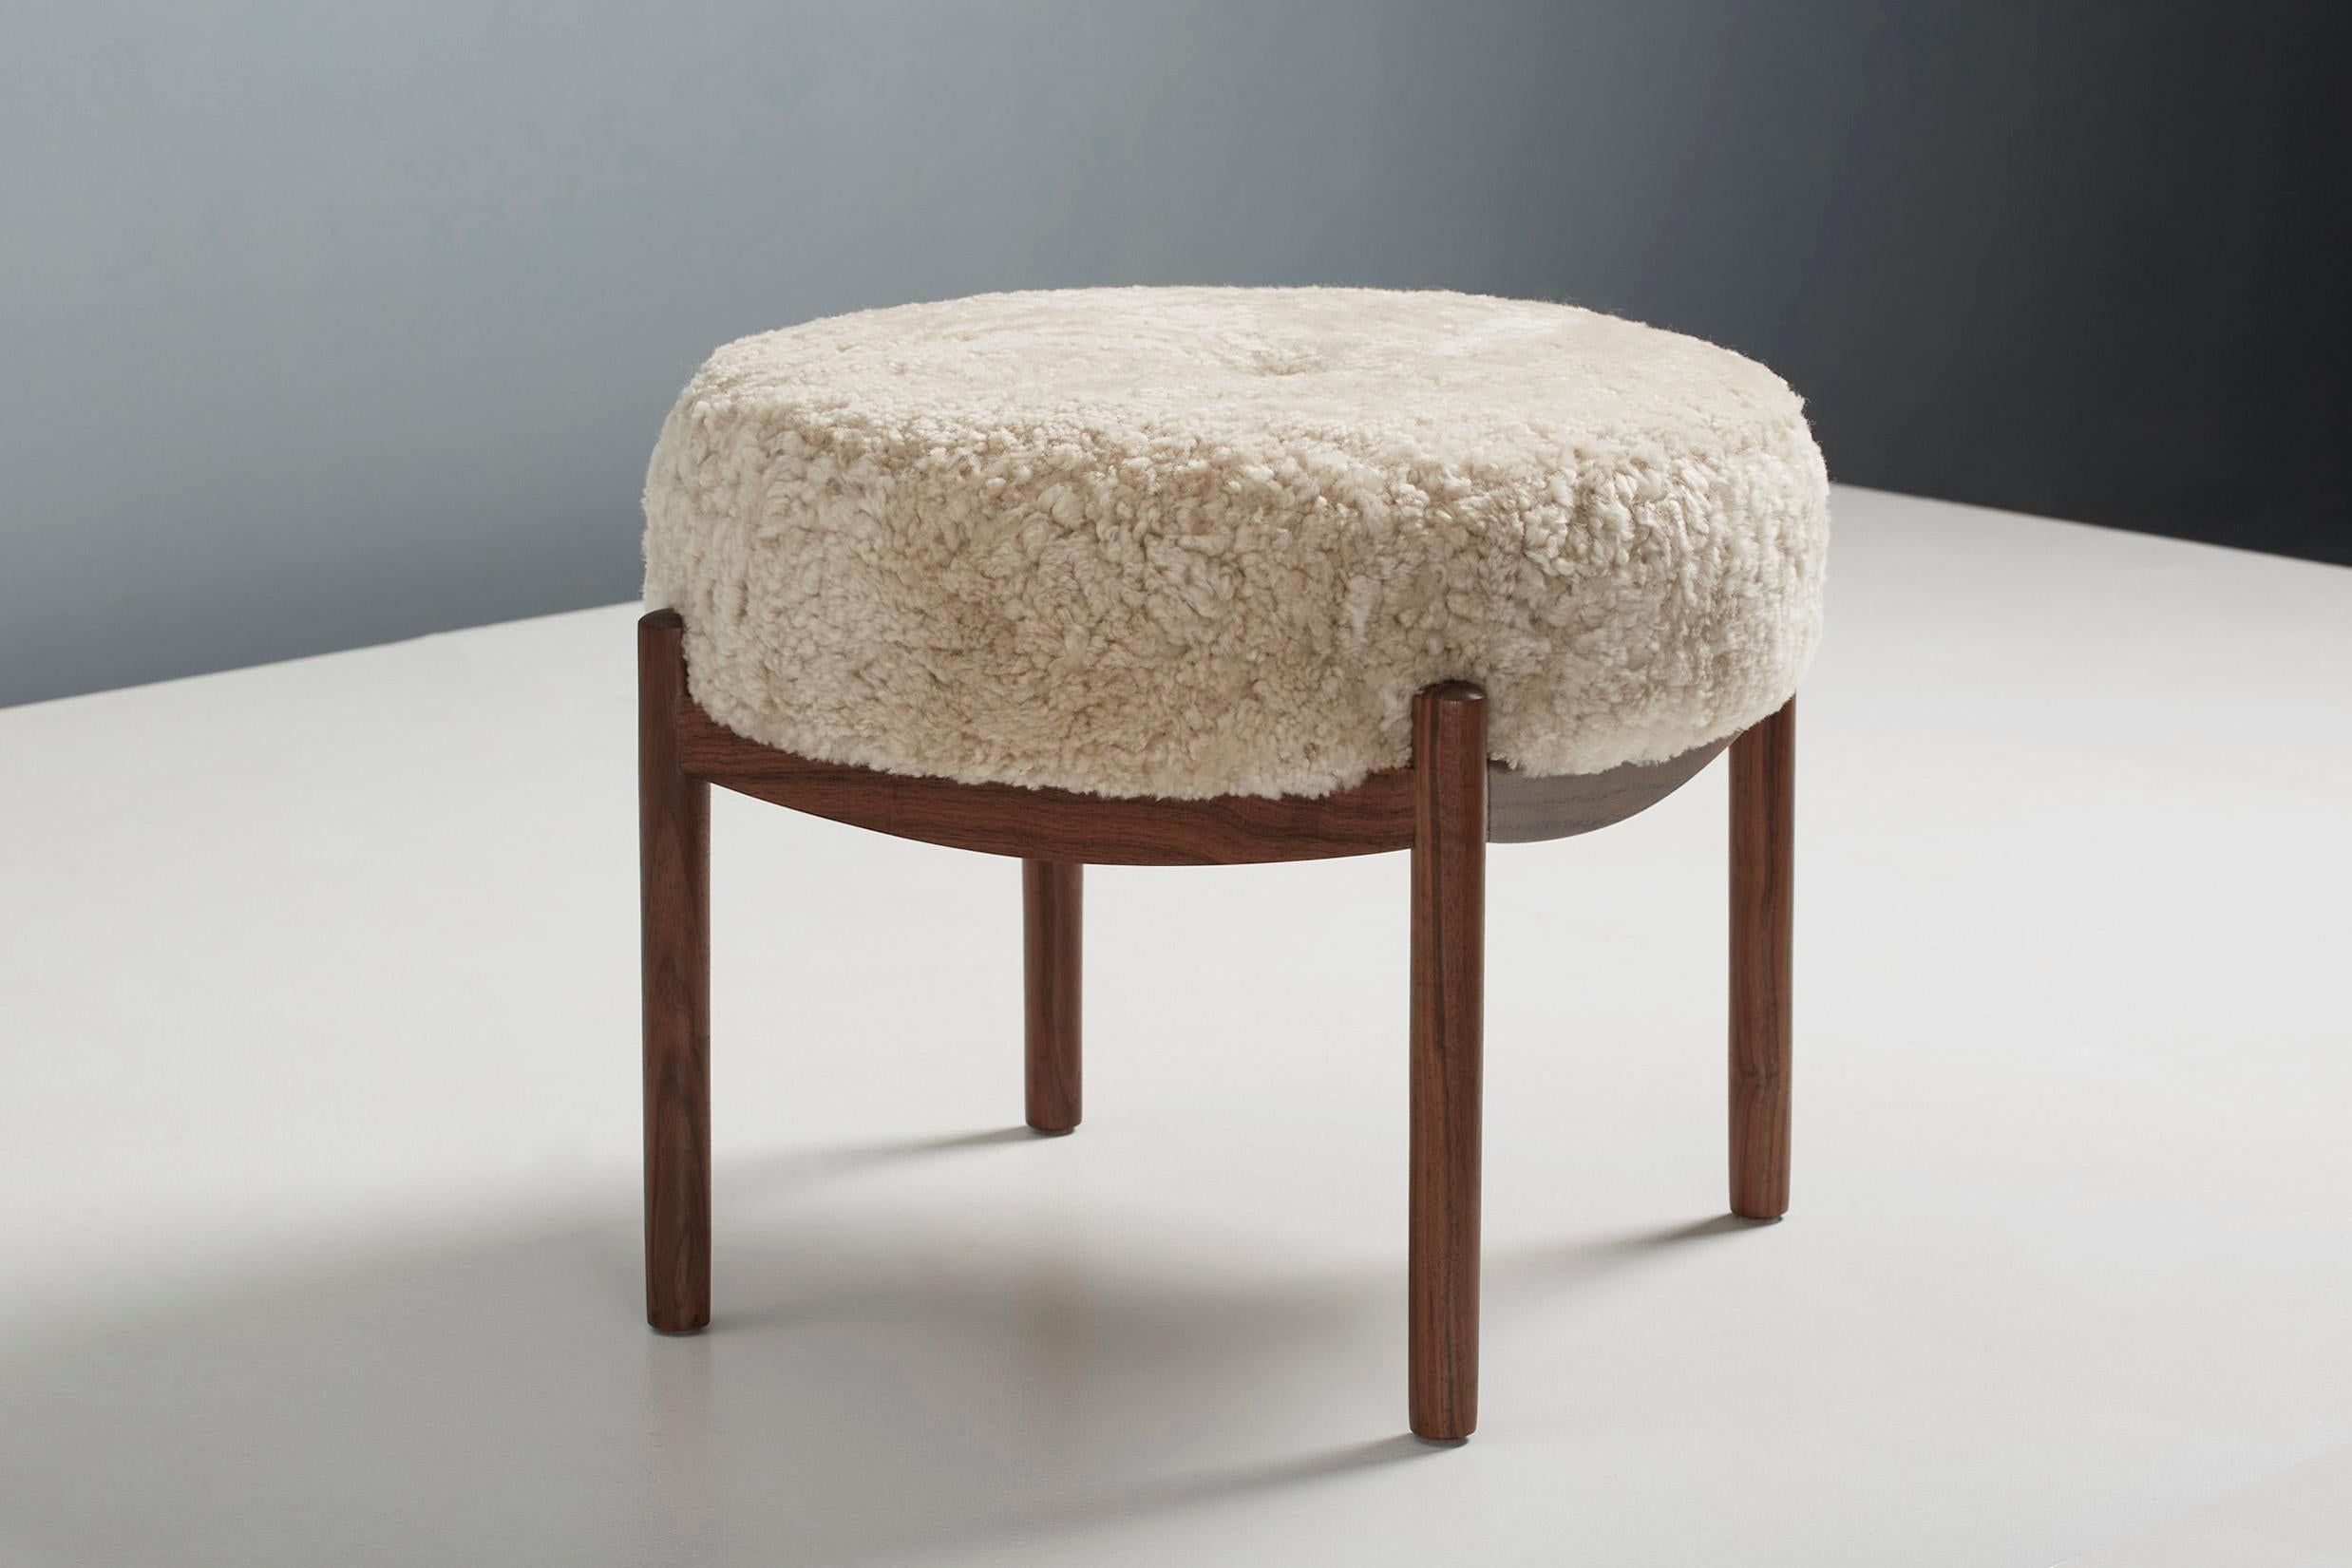 Custom Made Walnut And Shearling Round Ottoman For Sale At 1stdibs Throughout Satin Black Shearling Ottomans (View 2 of 15)